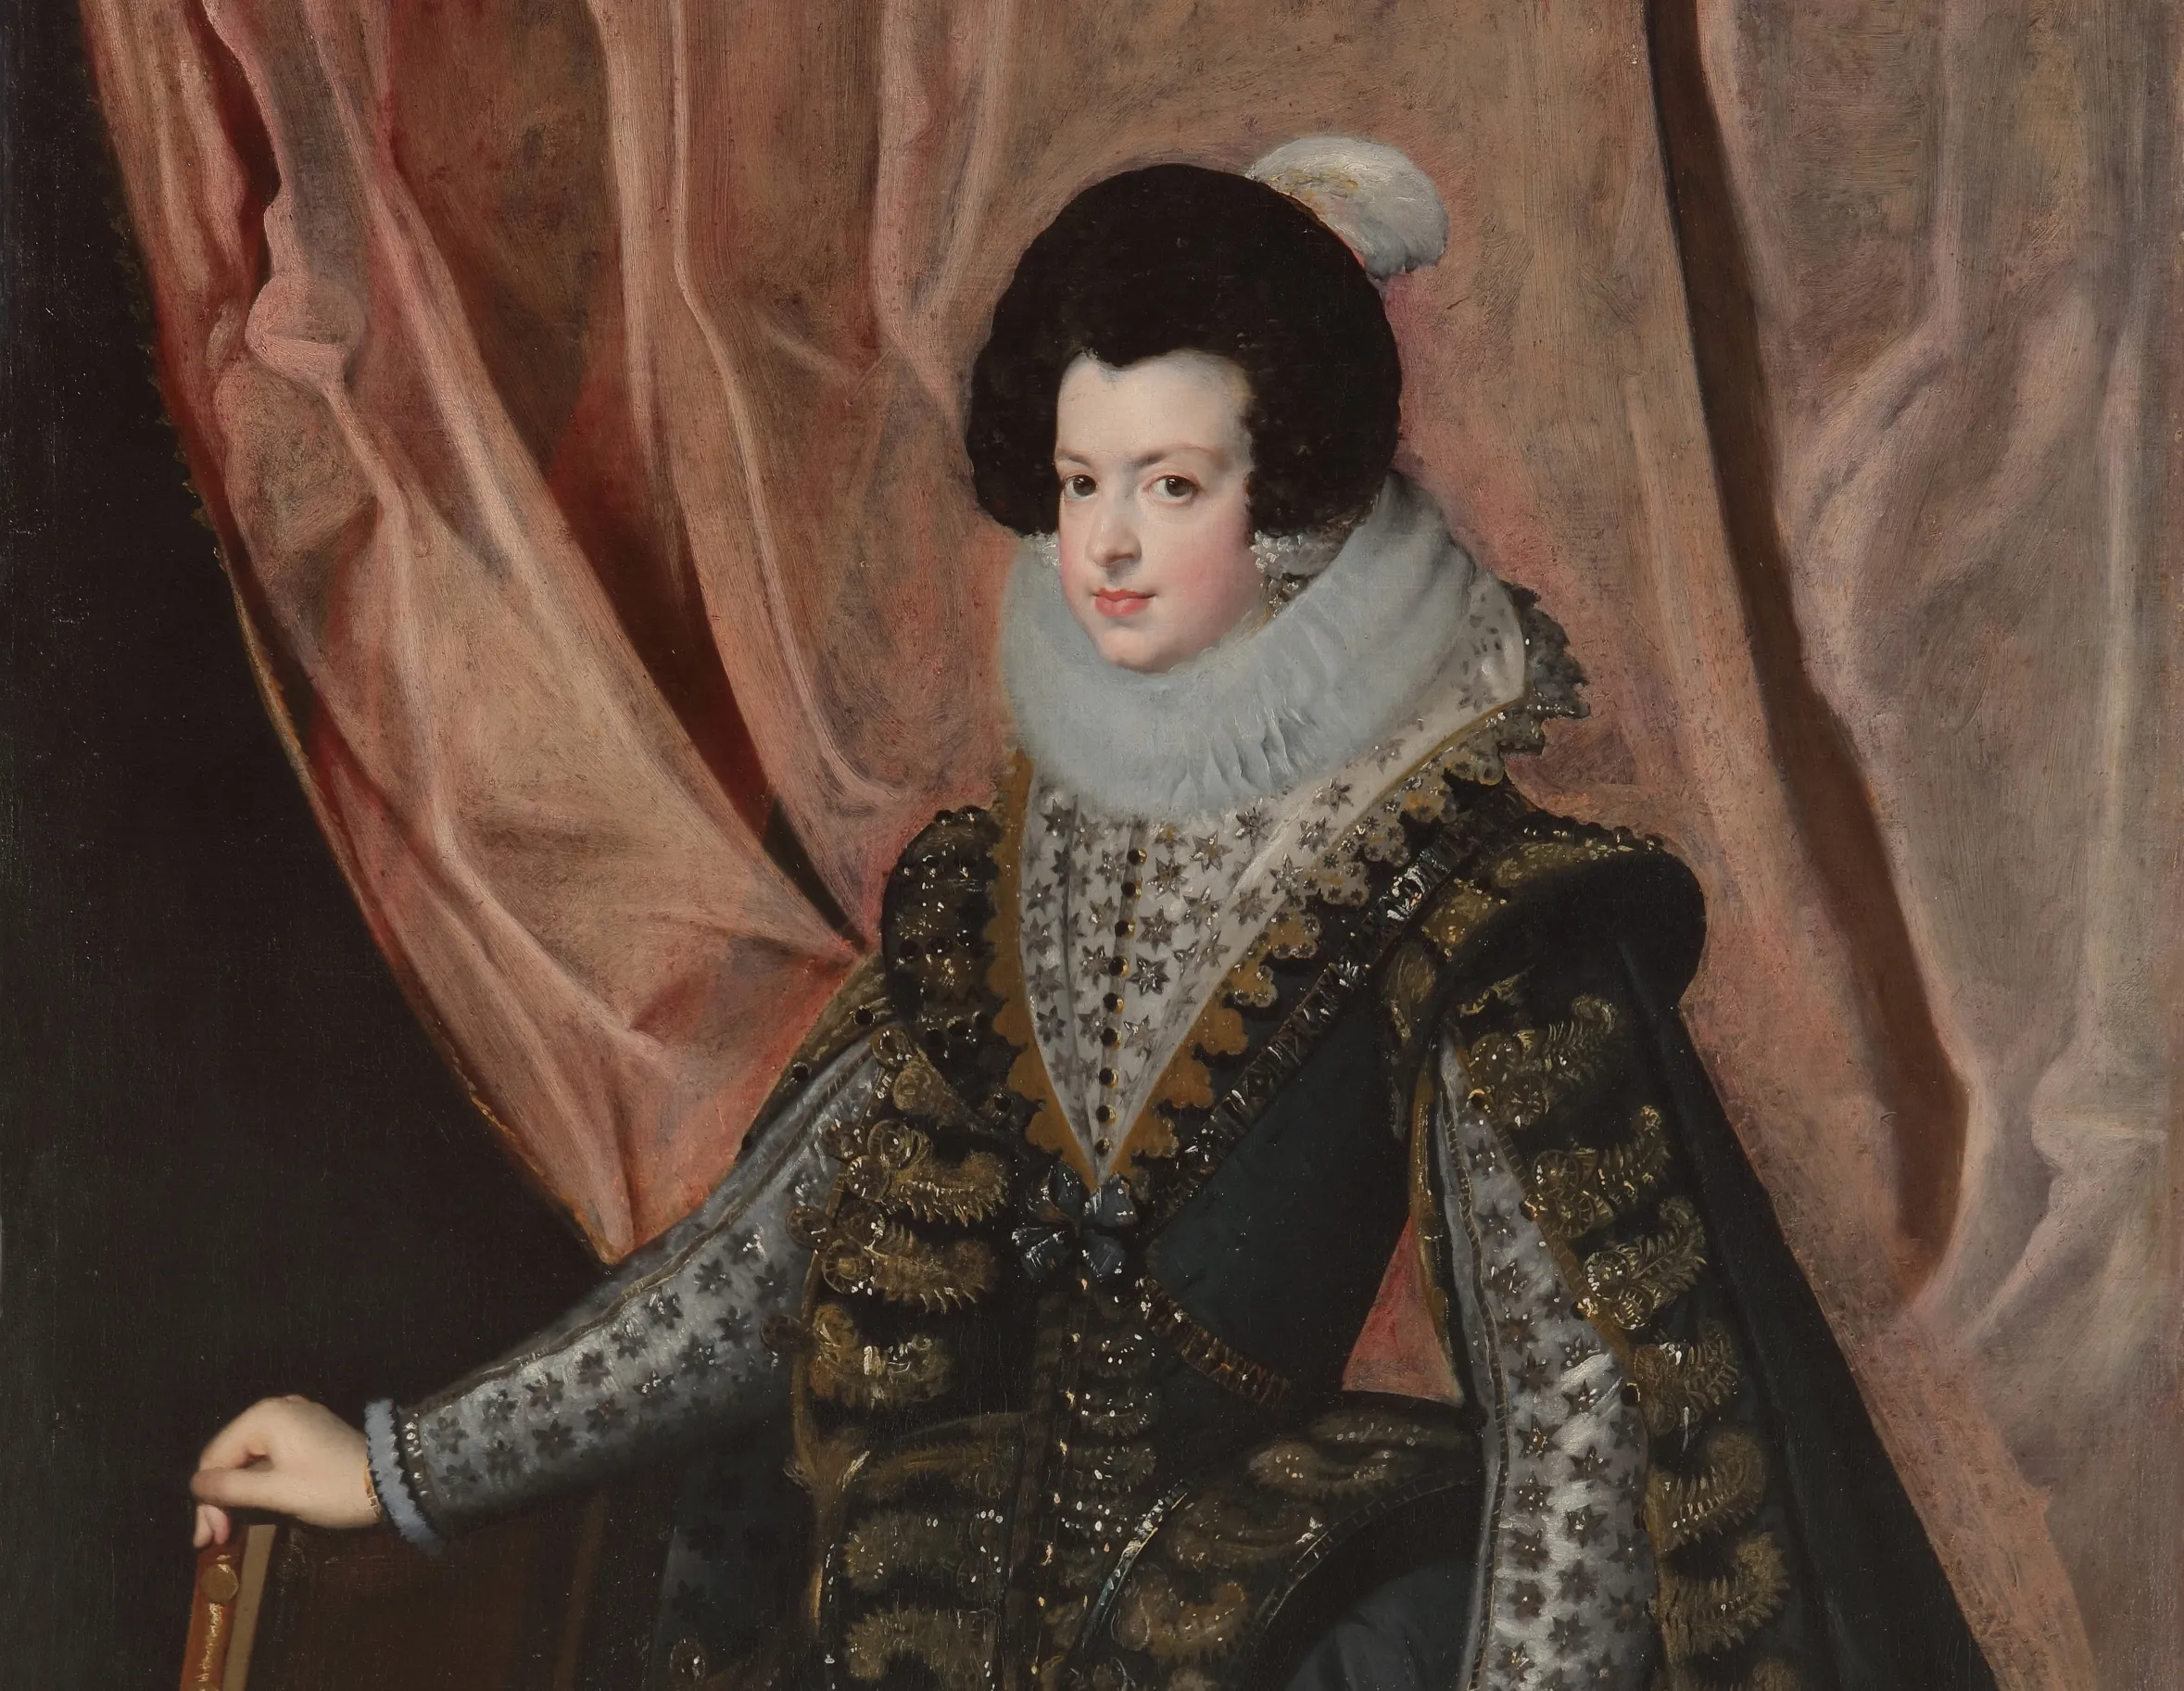 A Royal Portrait by Diego Velázquez Heads to Auction for the First Time in Half a Century